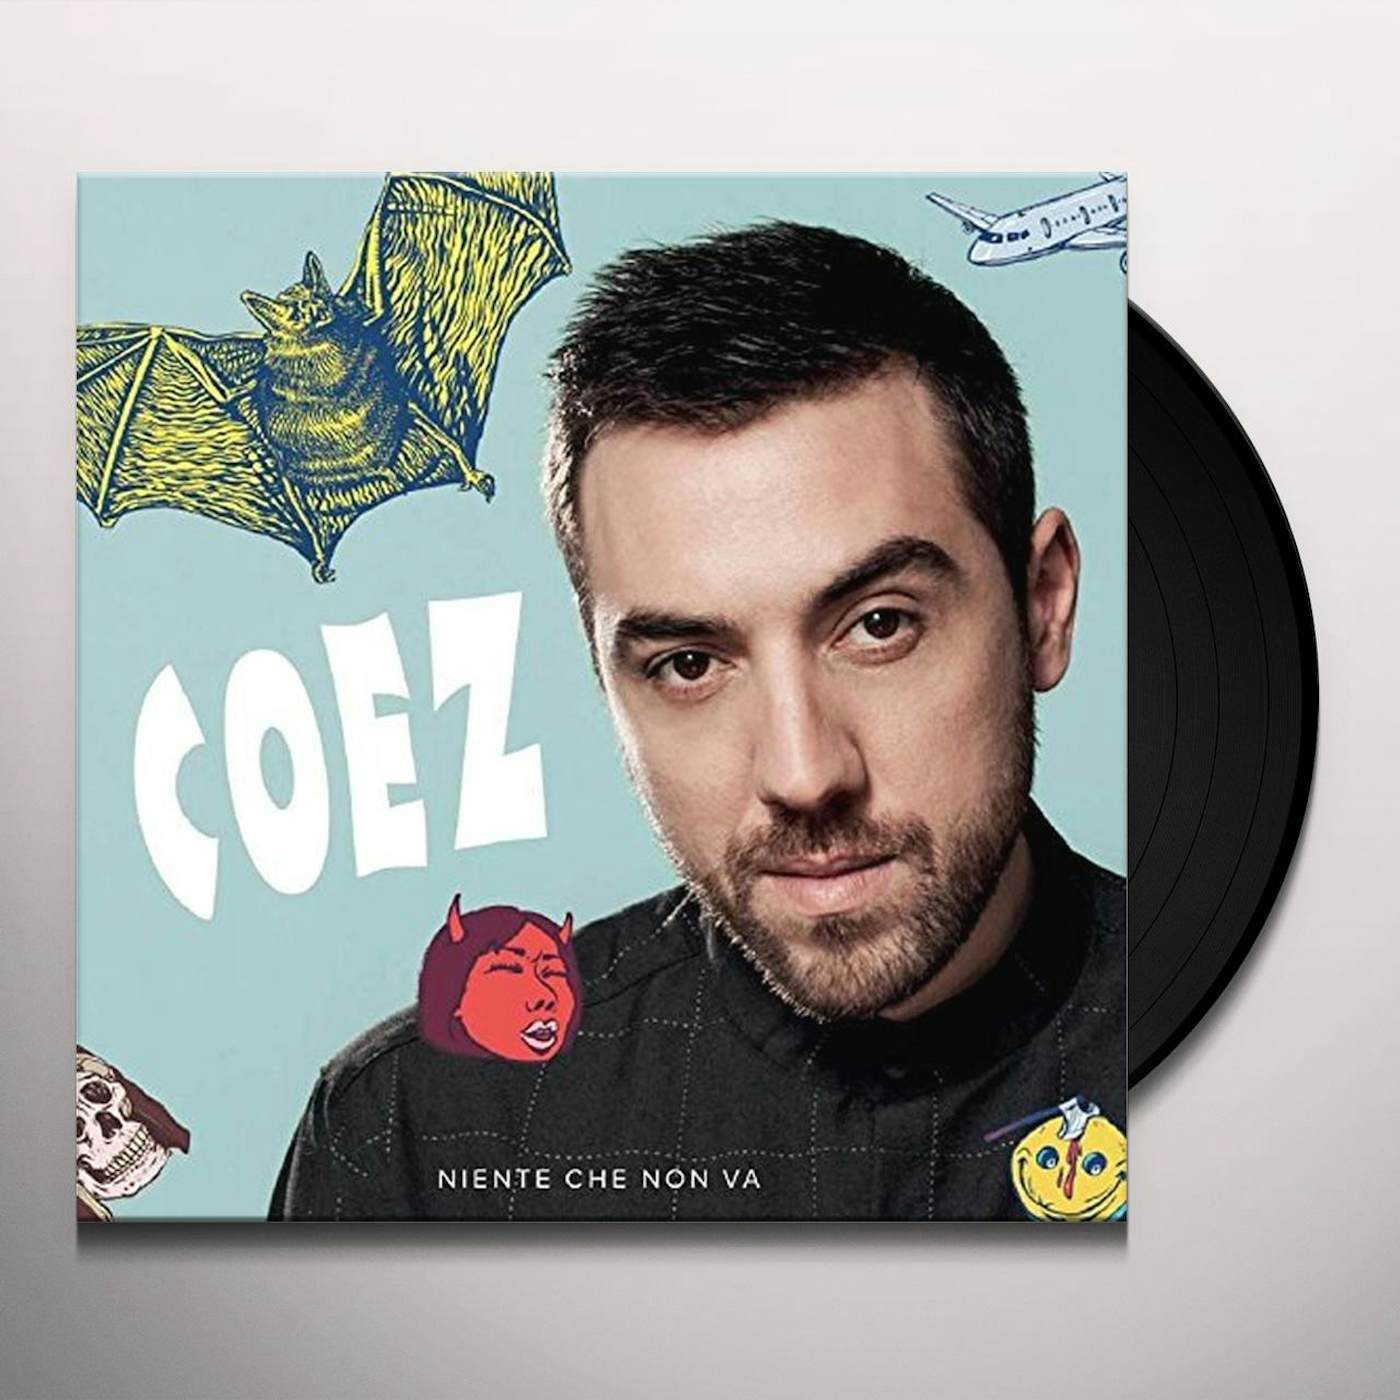 Coez From The Rooftop 01 Vinyl Record